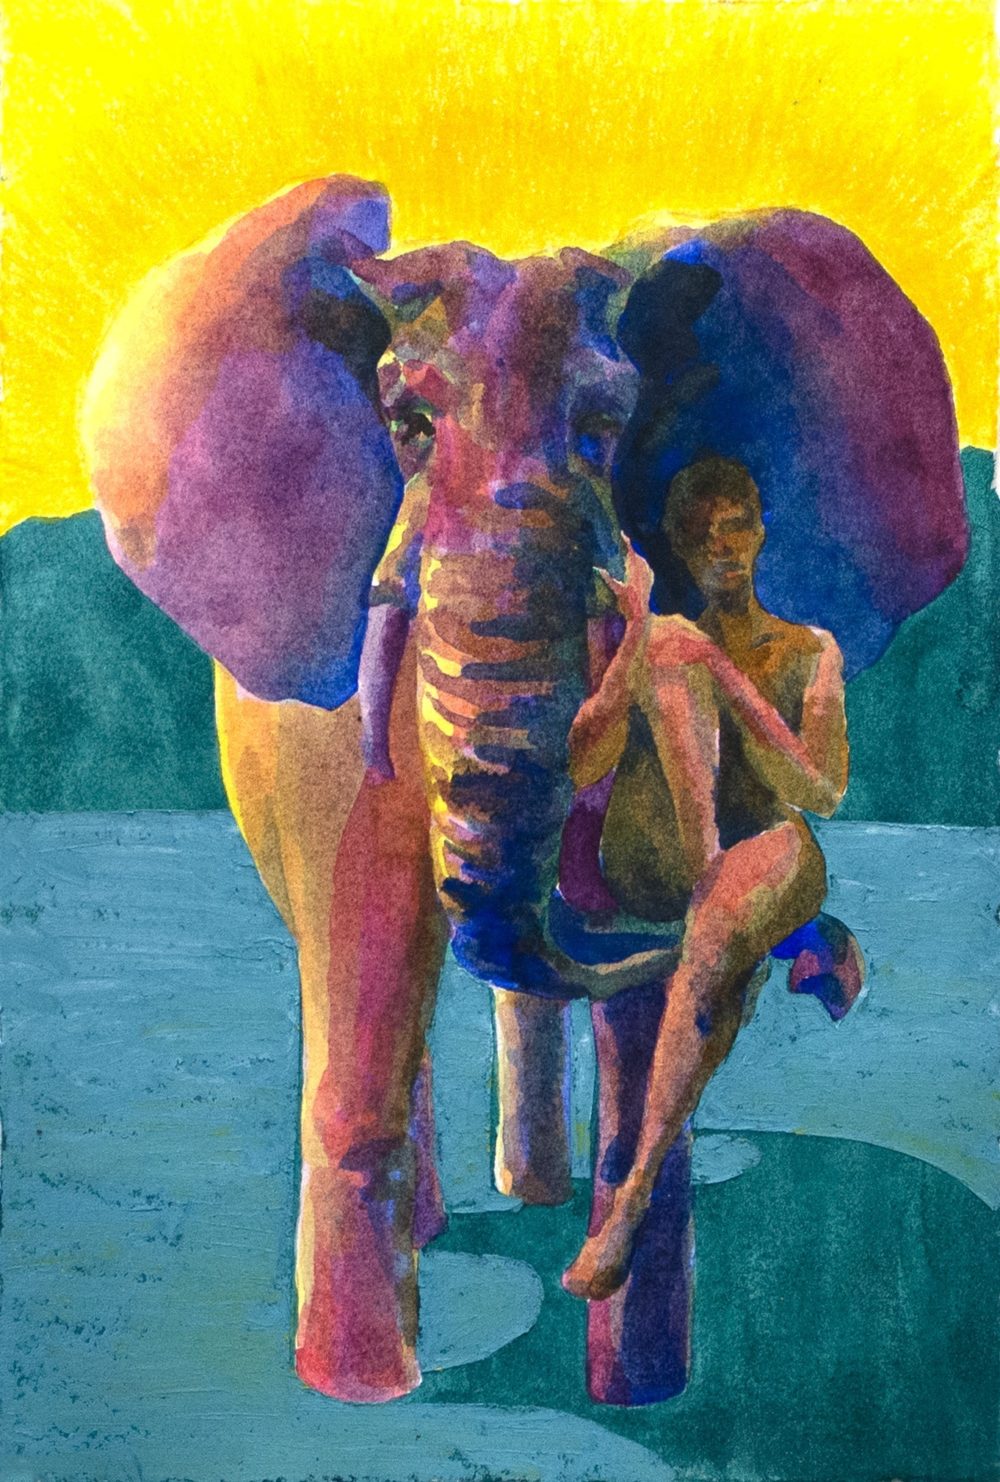 Front view of an elephant with a person sitting in its trunk on the right side of the image.